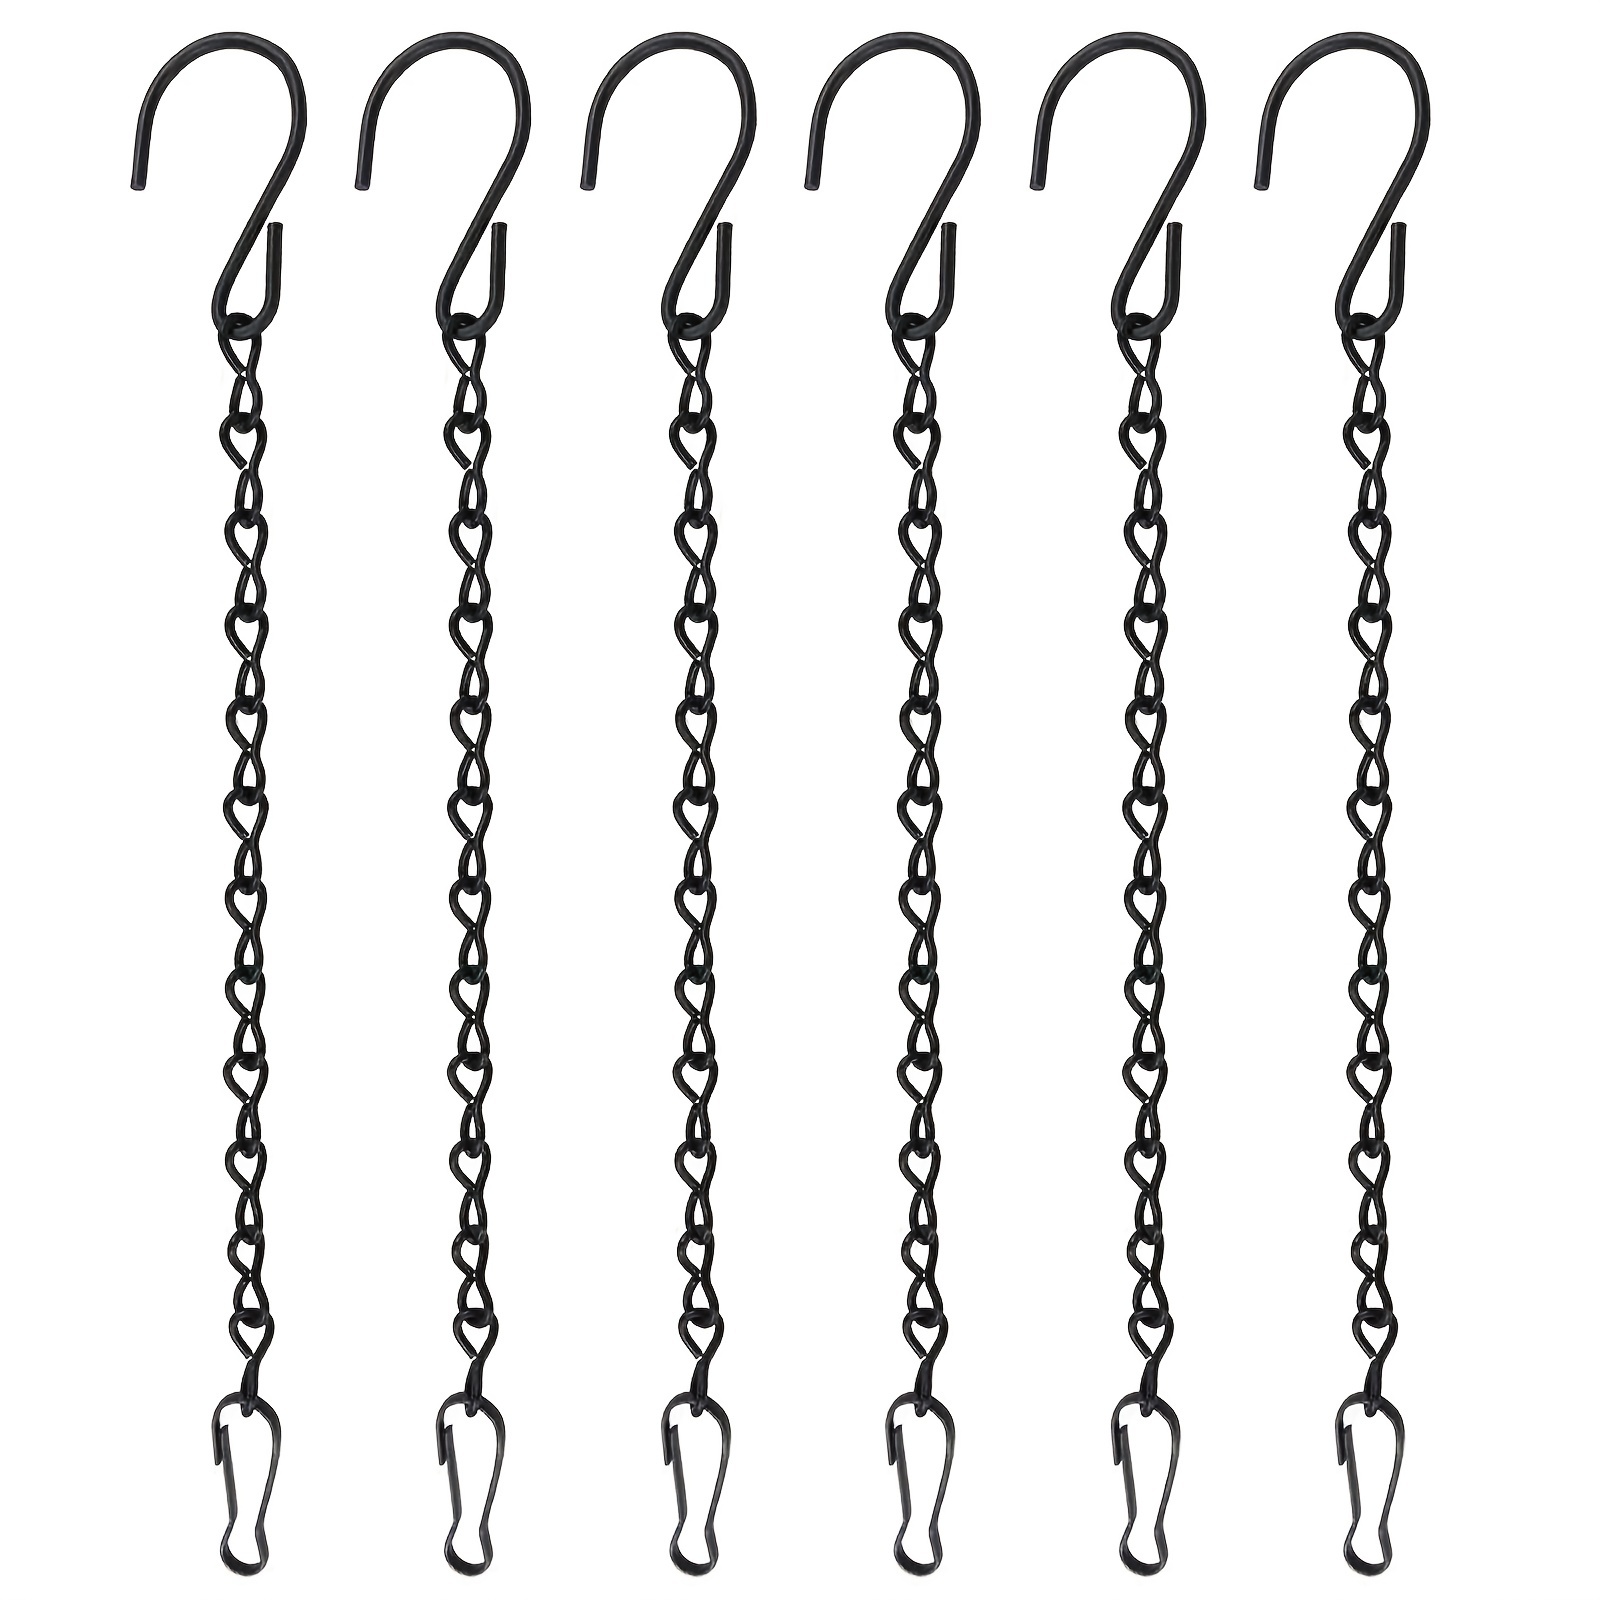 6 Packs 9.4in Black Hanging Chain For Hanging Bird Feeders, Bird Houses,  Planters, Baskets, Birdbaths, Lanterns, Wind Chimes, Billboards, Signs And  Or